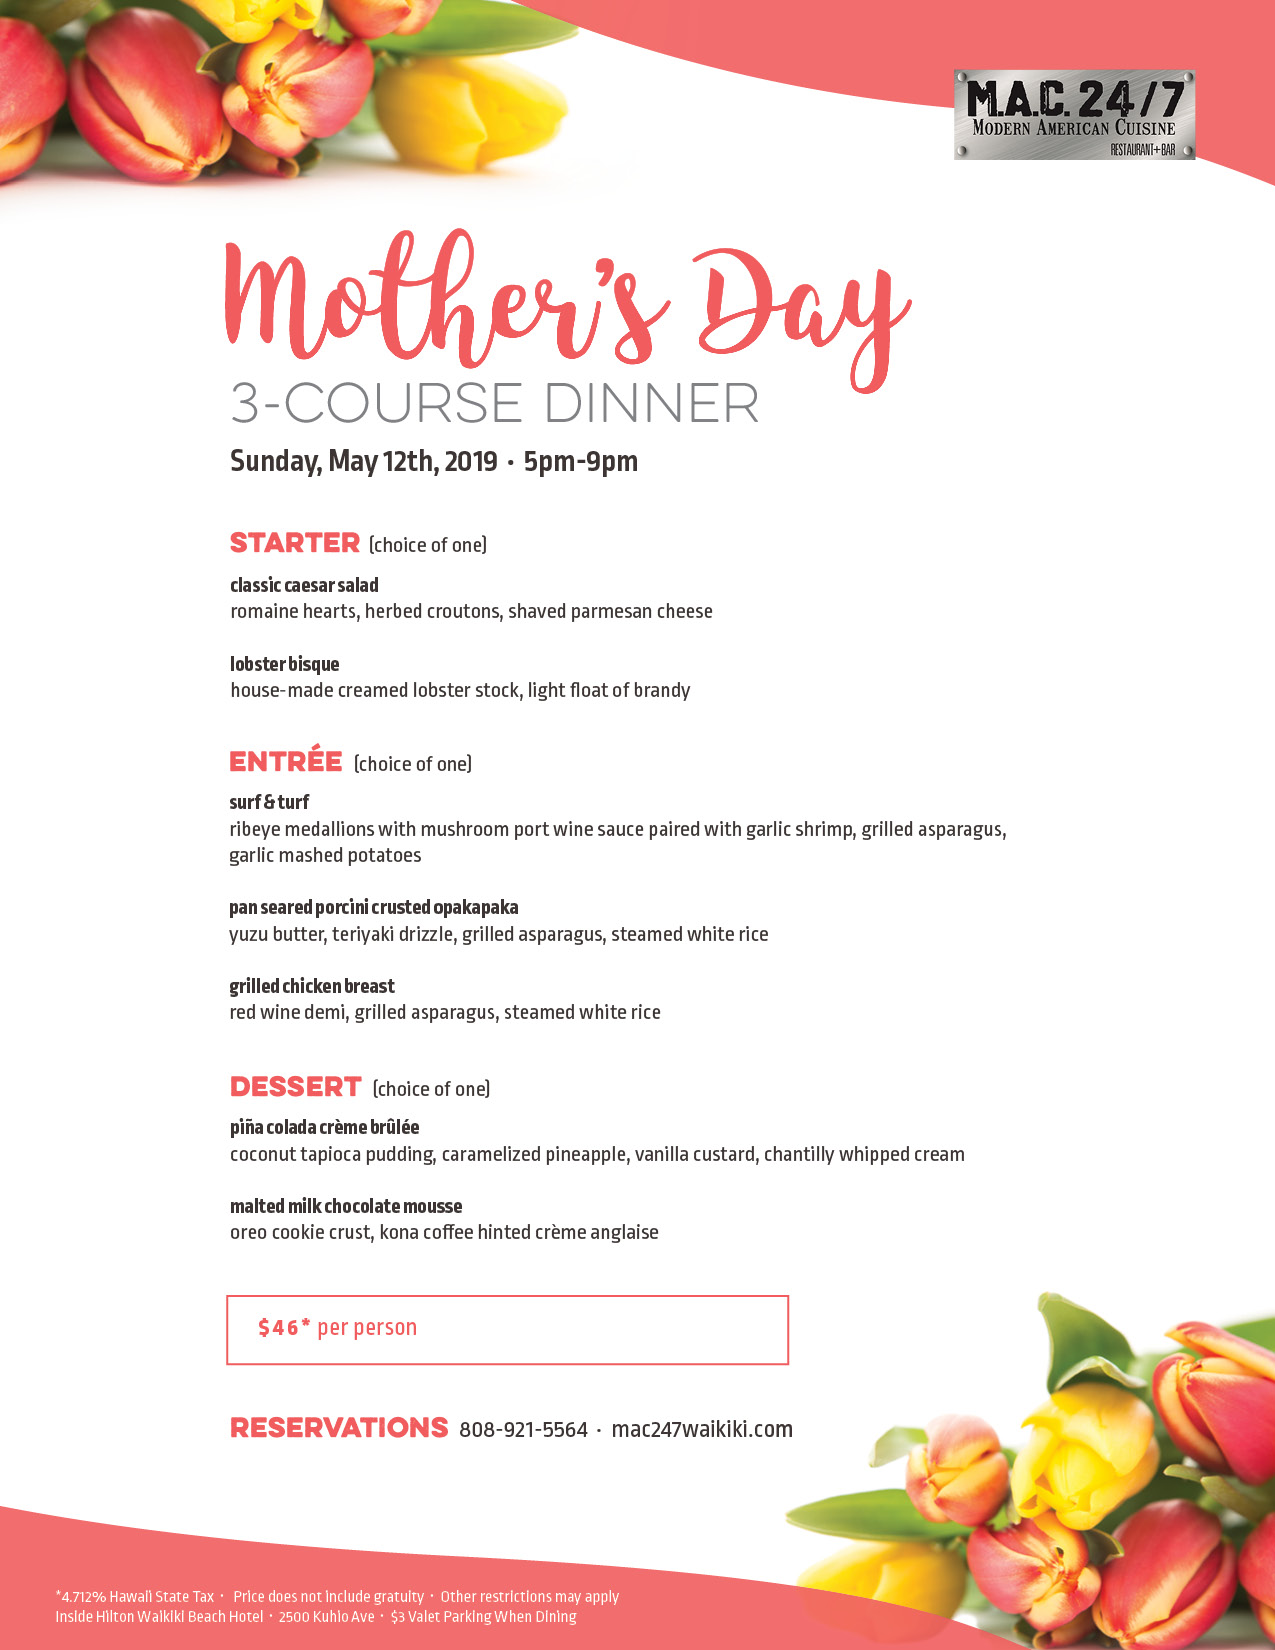 Top 20 Mothers Day Dinner Menus Best Recipes Ideas and Collections